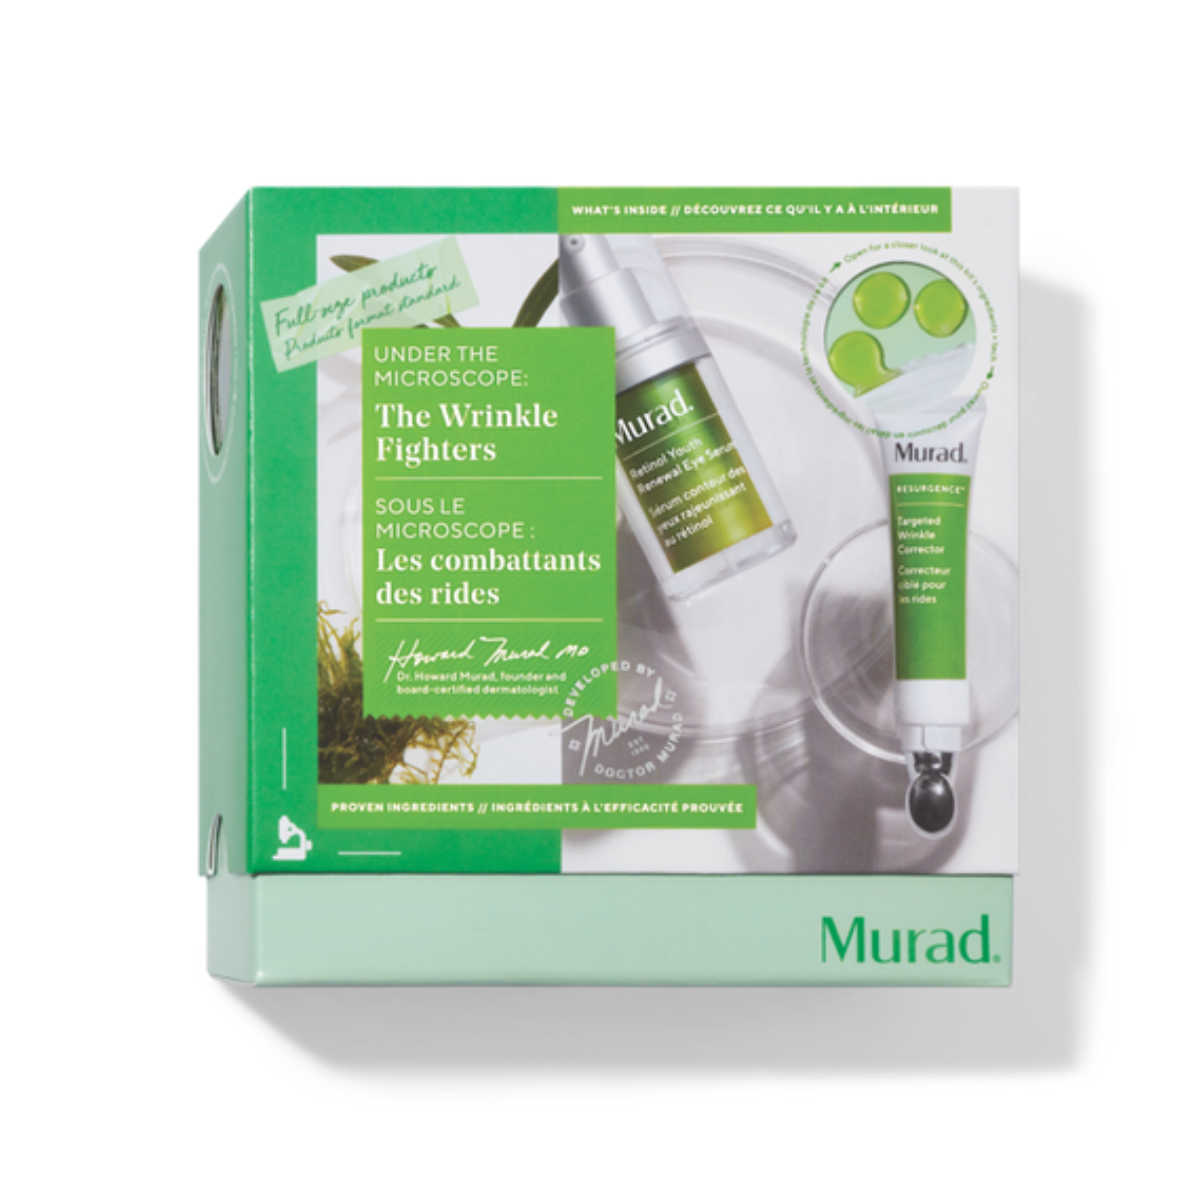 Murad Under the Microscope: The Wrinkle Fighters Gift Set